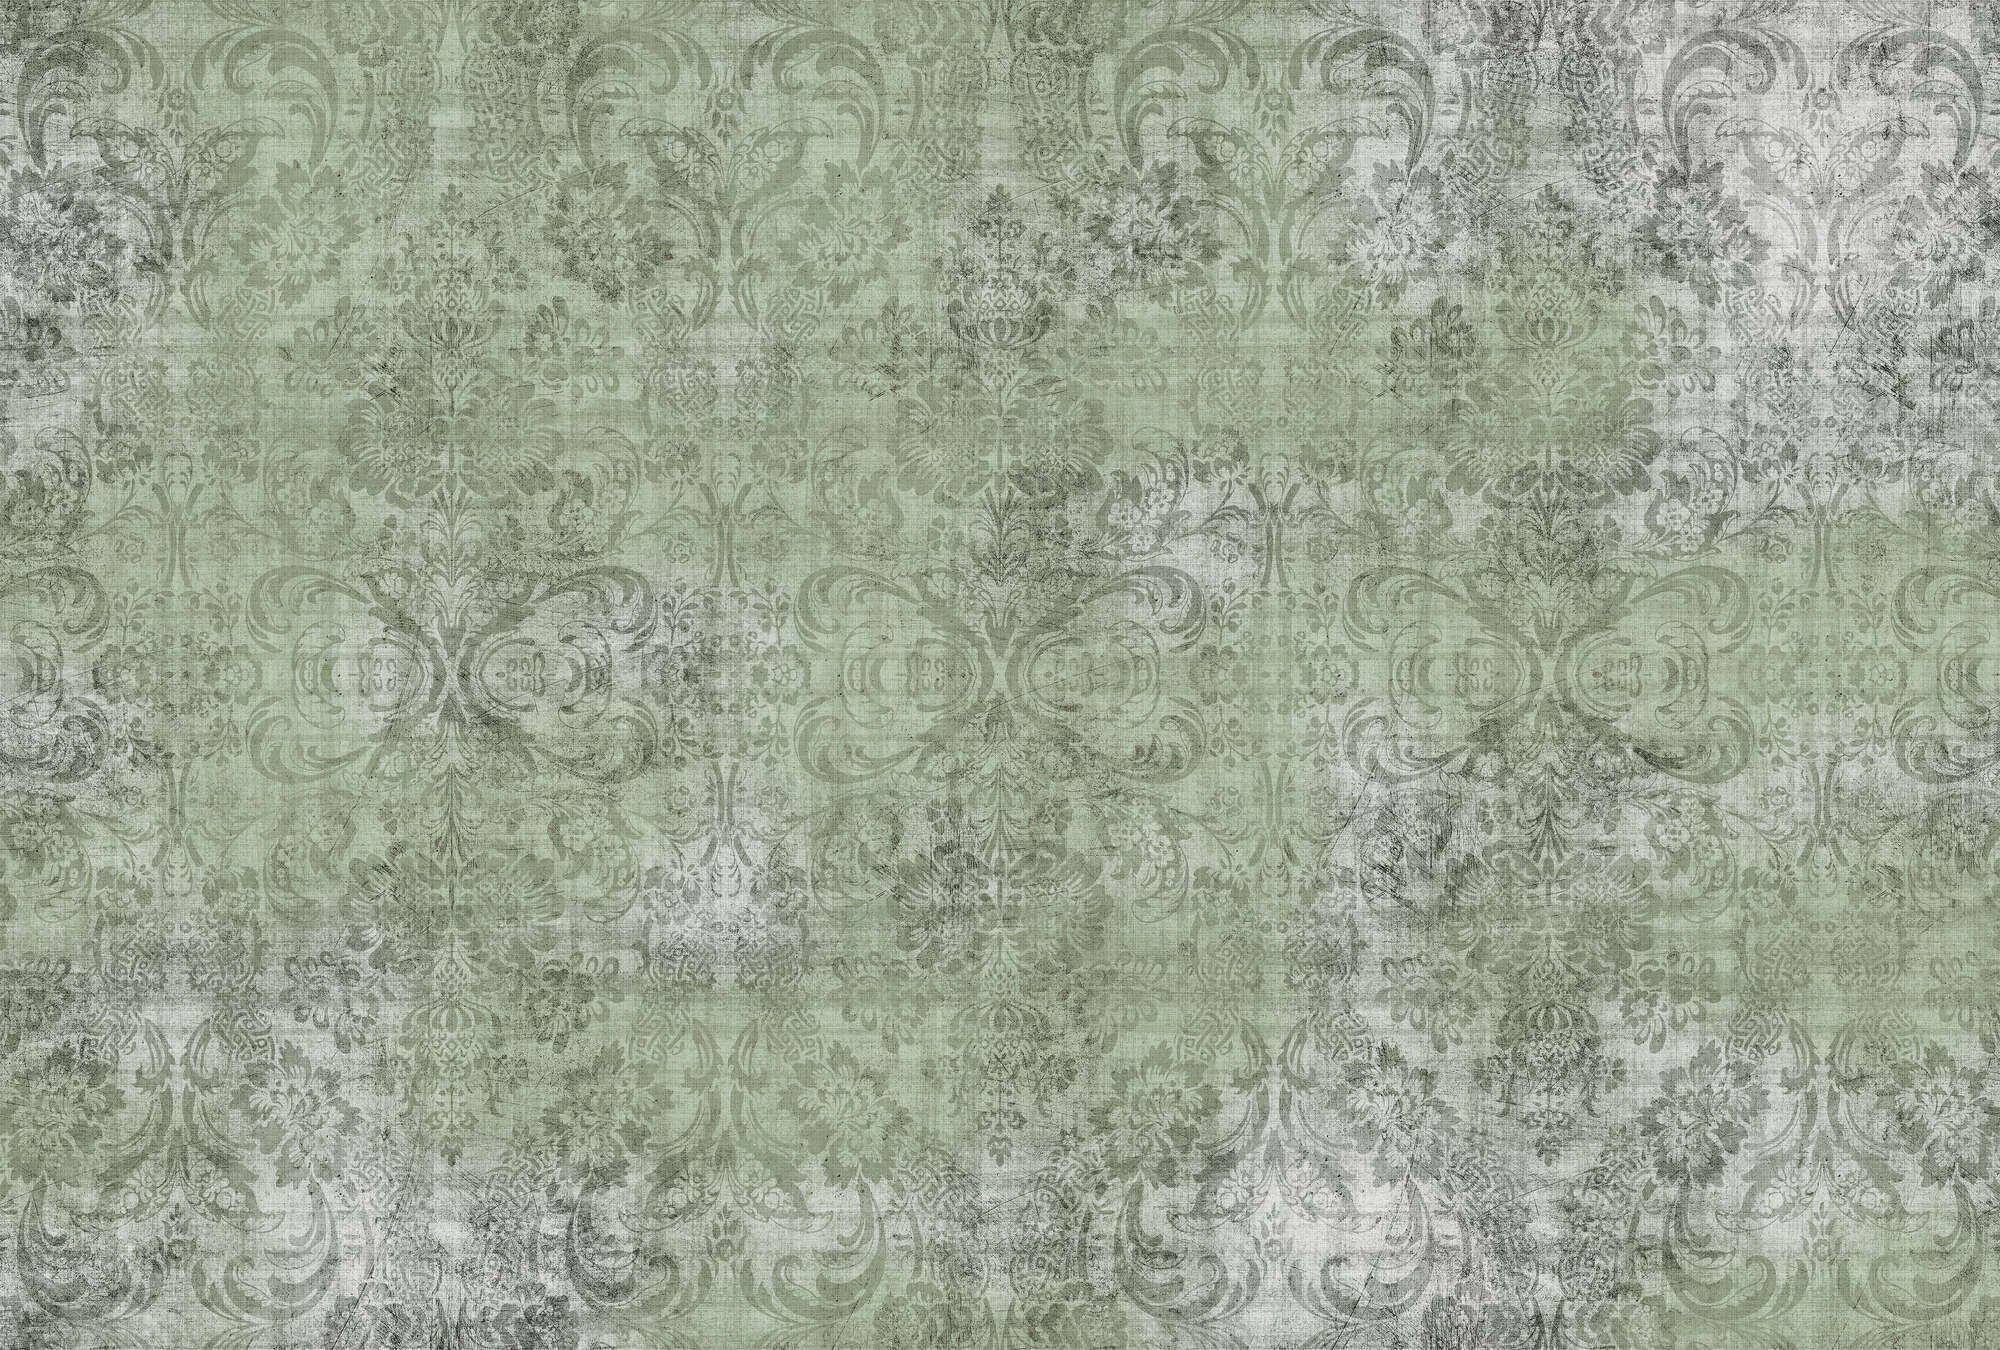             Old damask 2 - Ornaments on green mottled wallpaper- Nature linen structure - Green | Premium smooth fleece
        